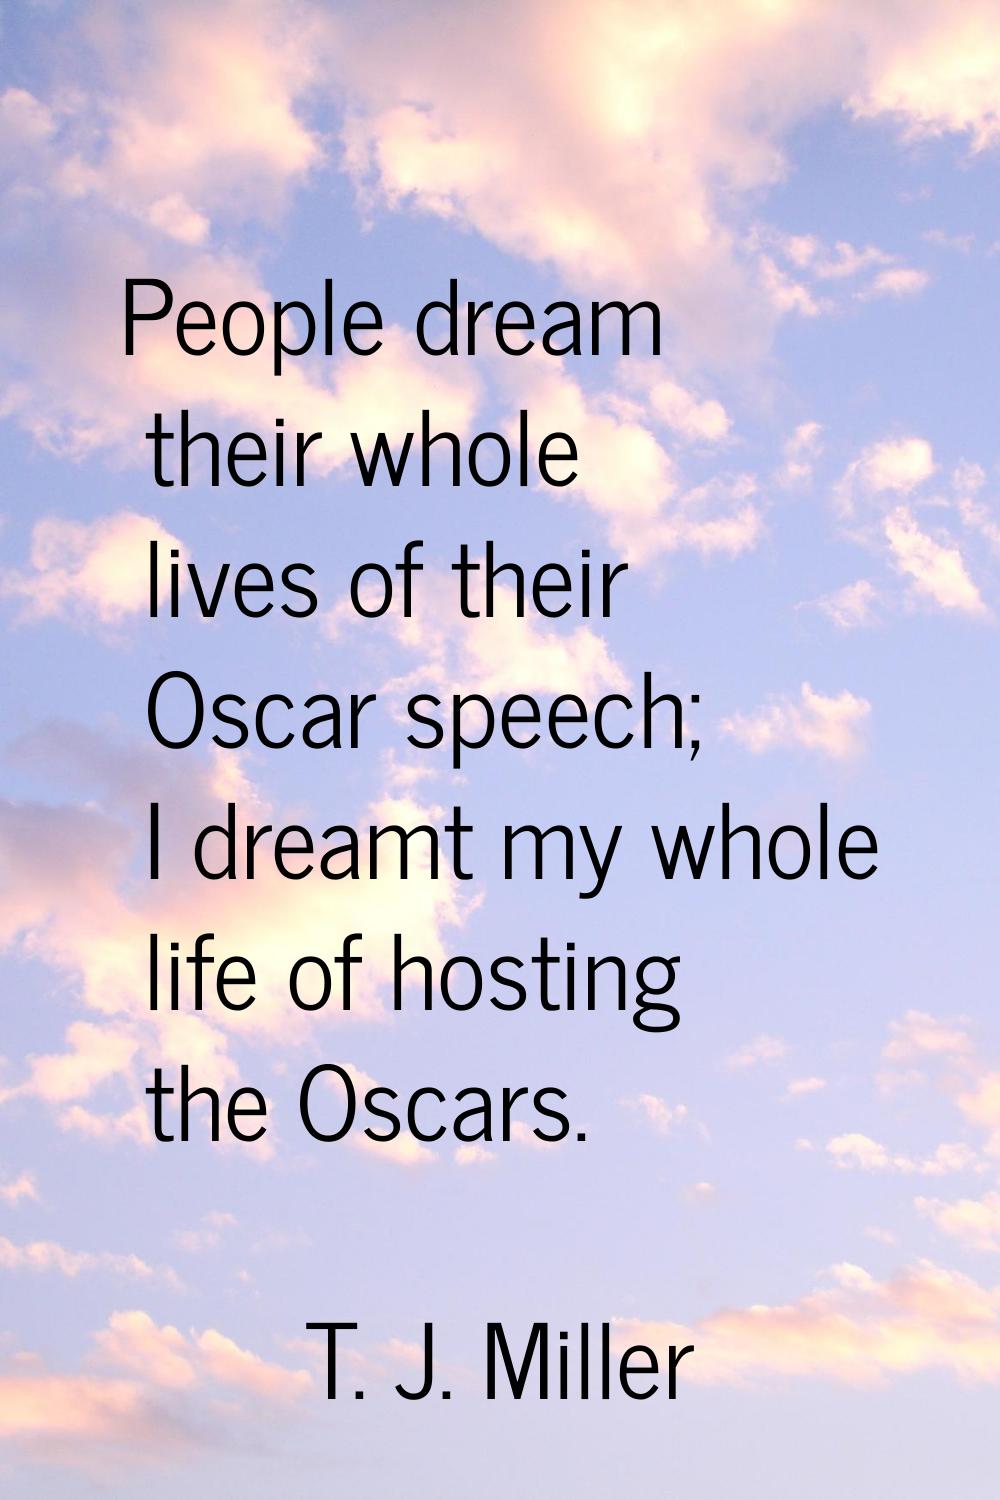 People dream their whole lives of their Oscar speech; I dreamt my whole life of hosting the Oscars.